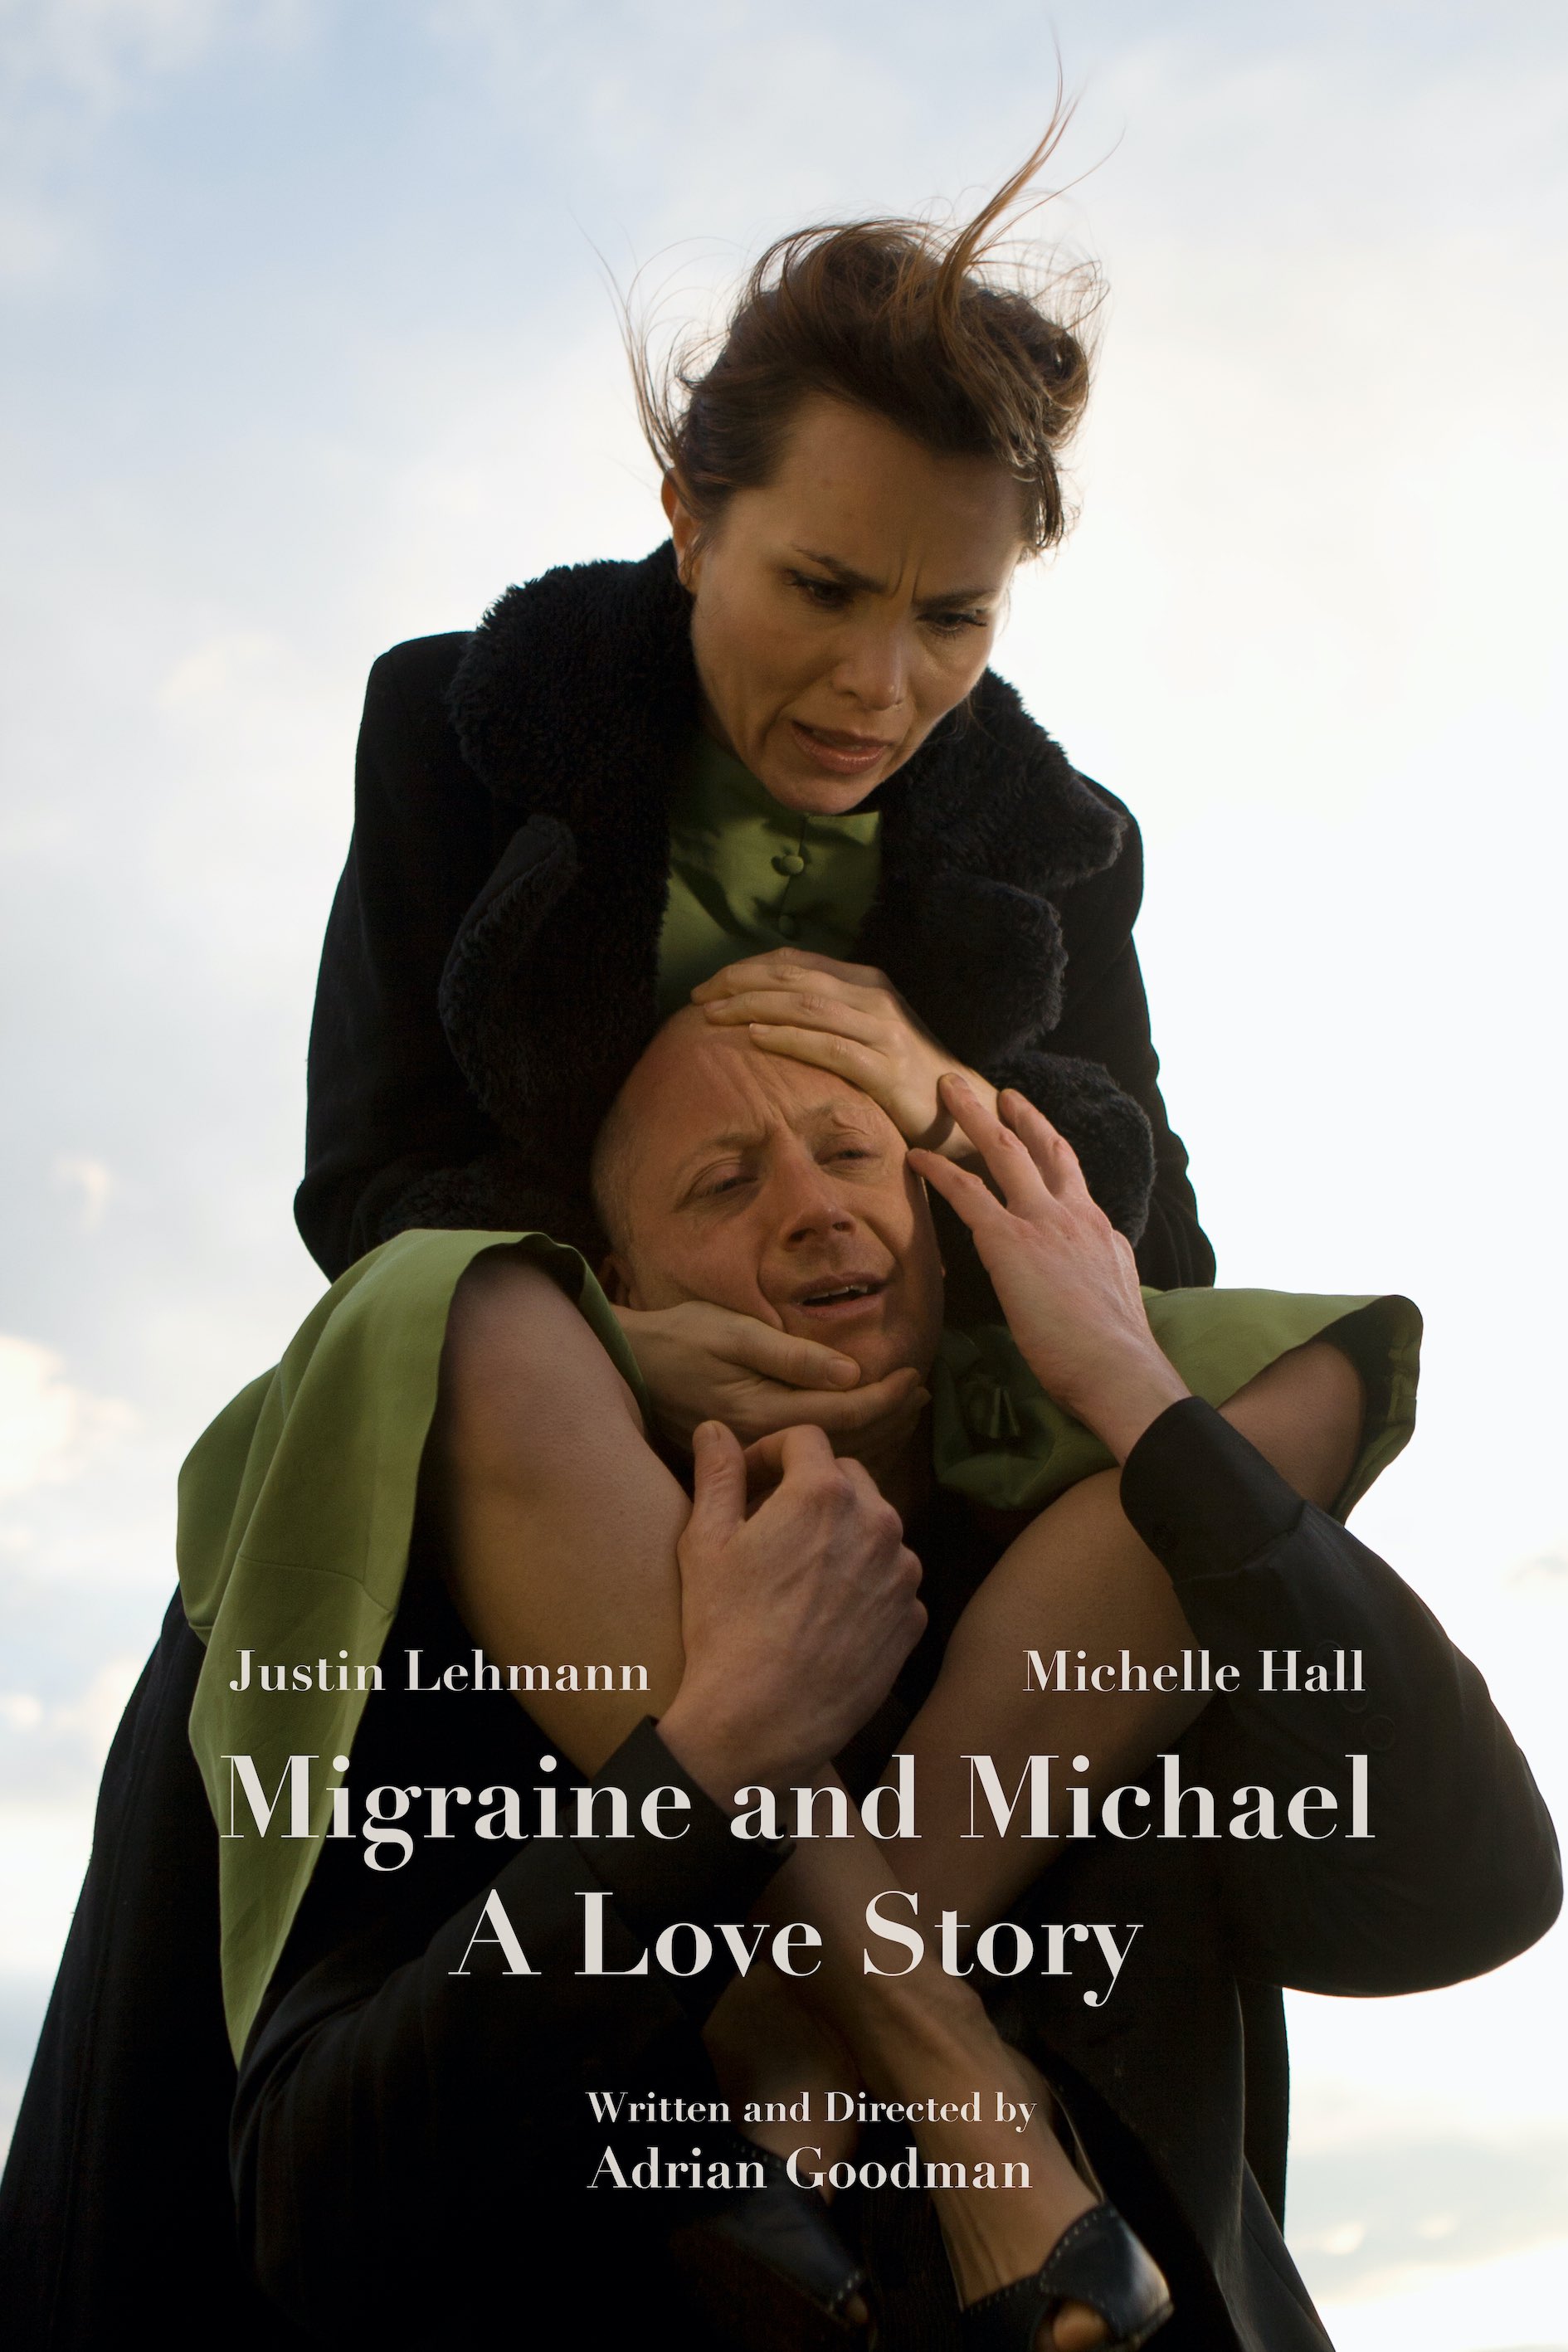 Migraine and Michael: A Love Story